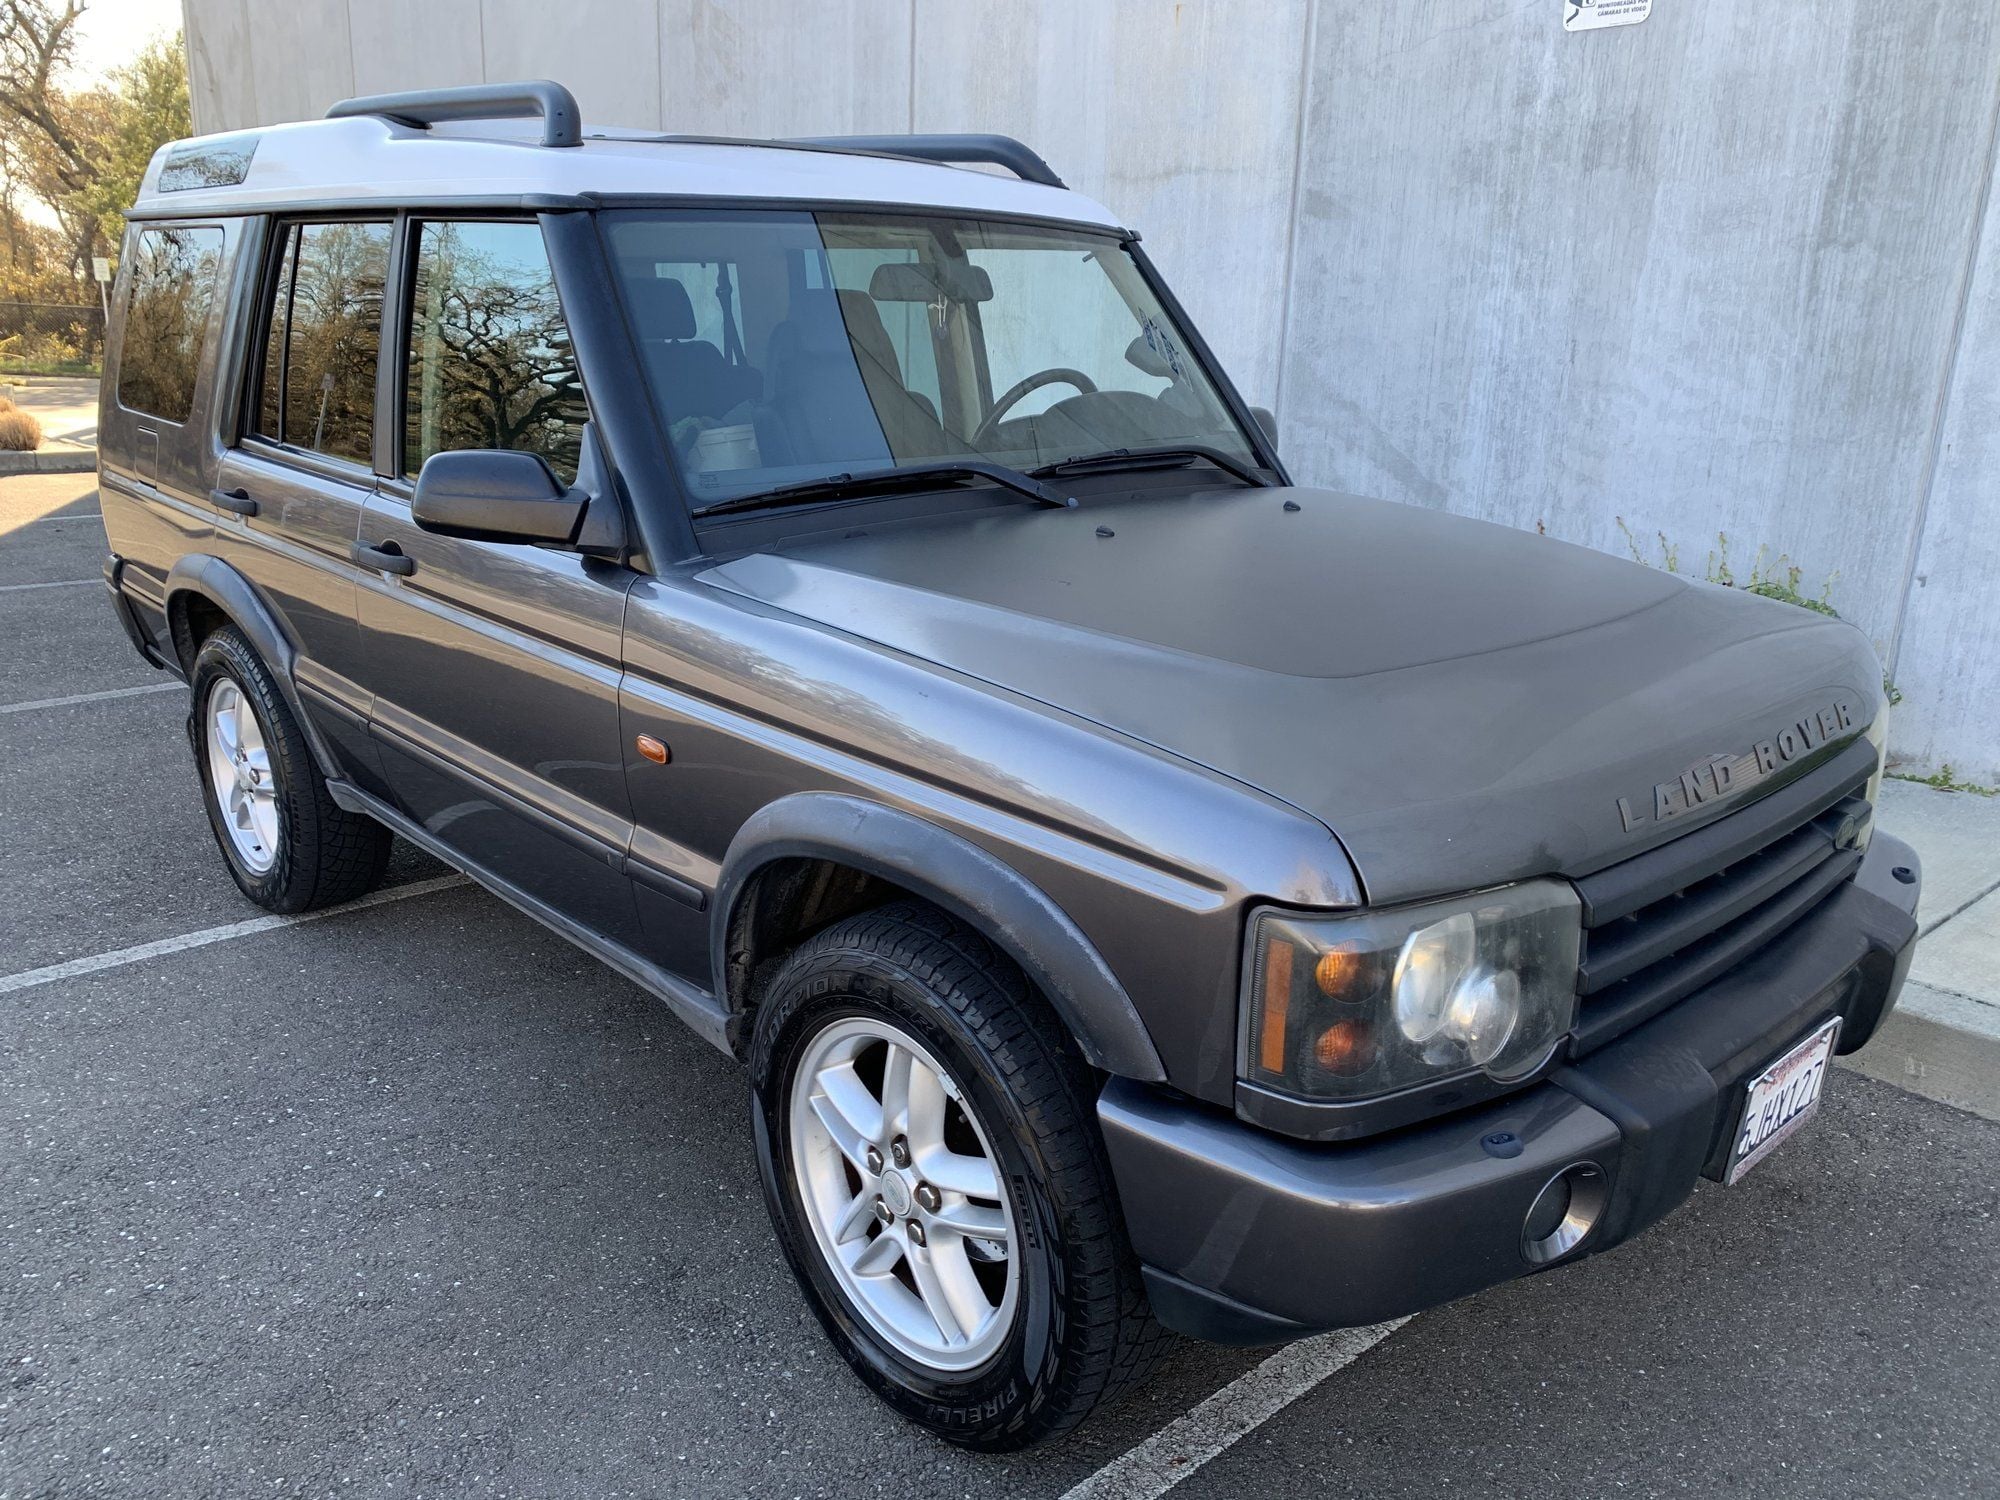 2004 Land Rover Discovery - 04 D2- Turner engine already installed - Used - VIN salty19444a830894 - 121,000 Miles - 8 cyl - 4WD - Automatic - SUV - Gray - Windsor, CA 95492, United States